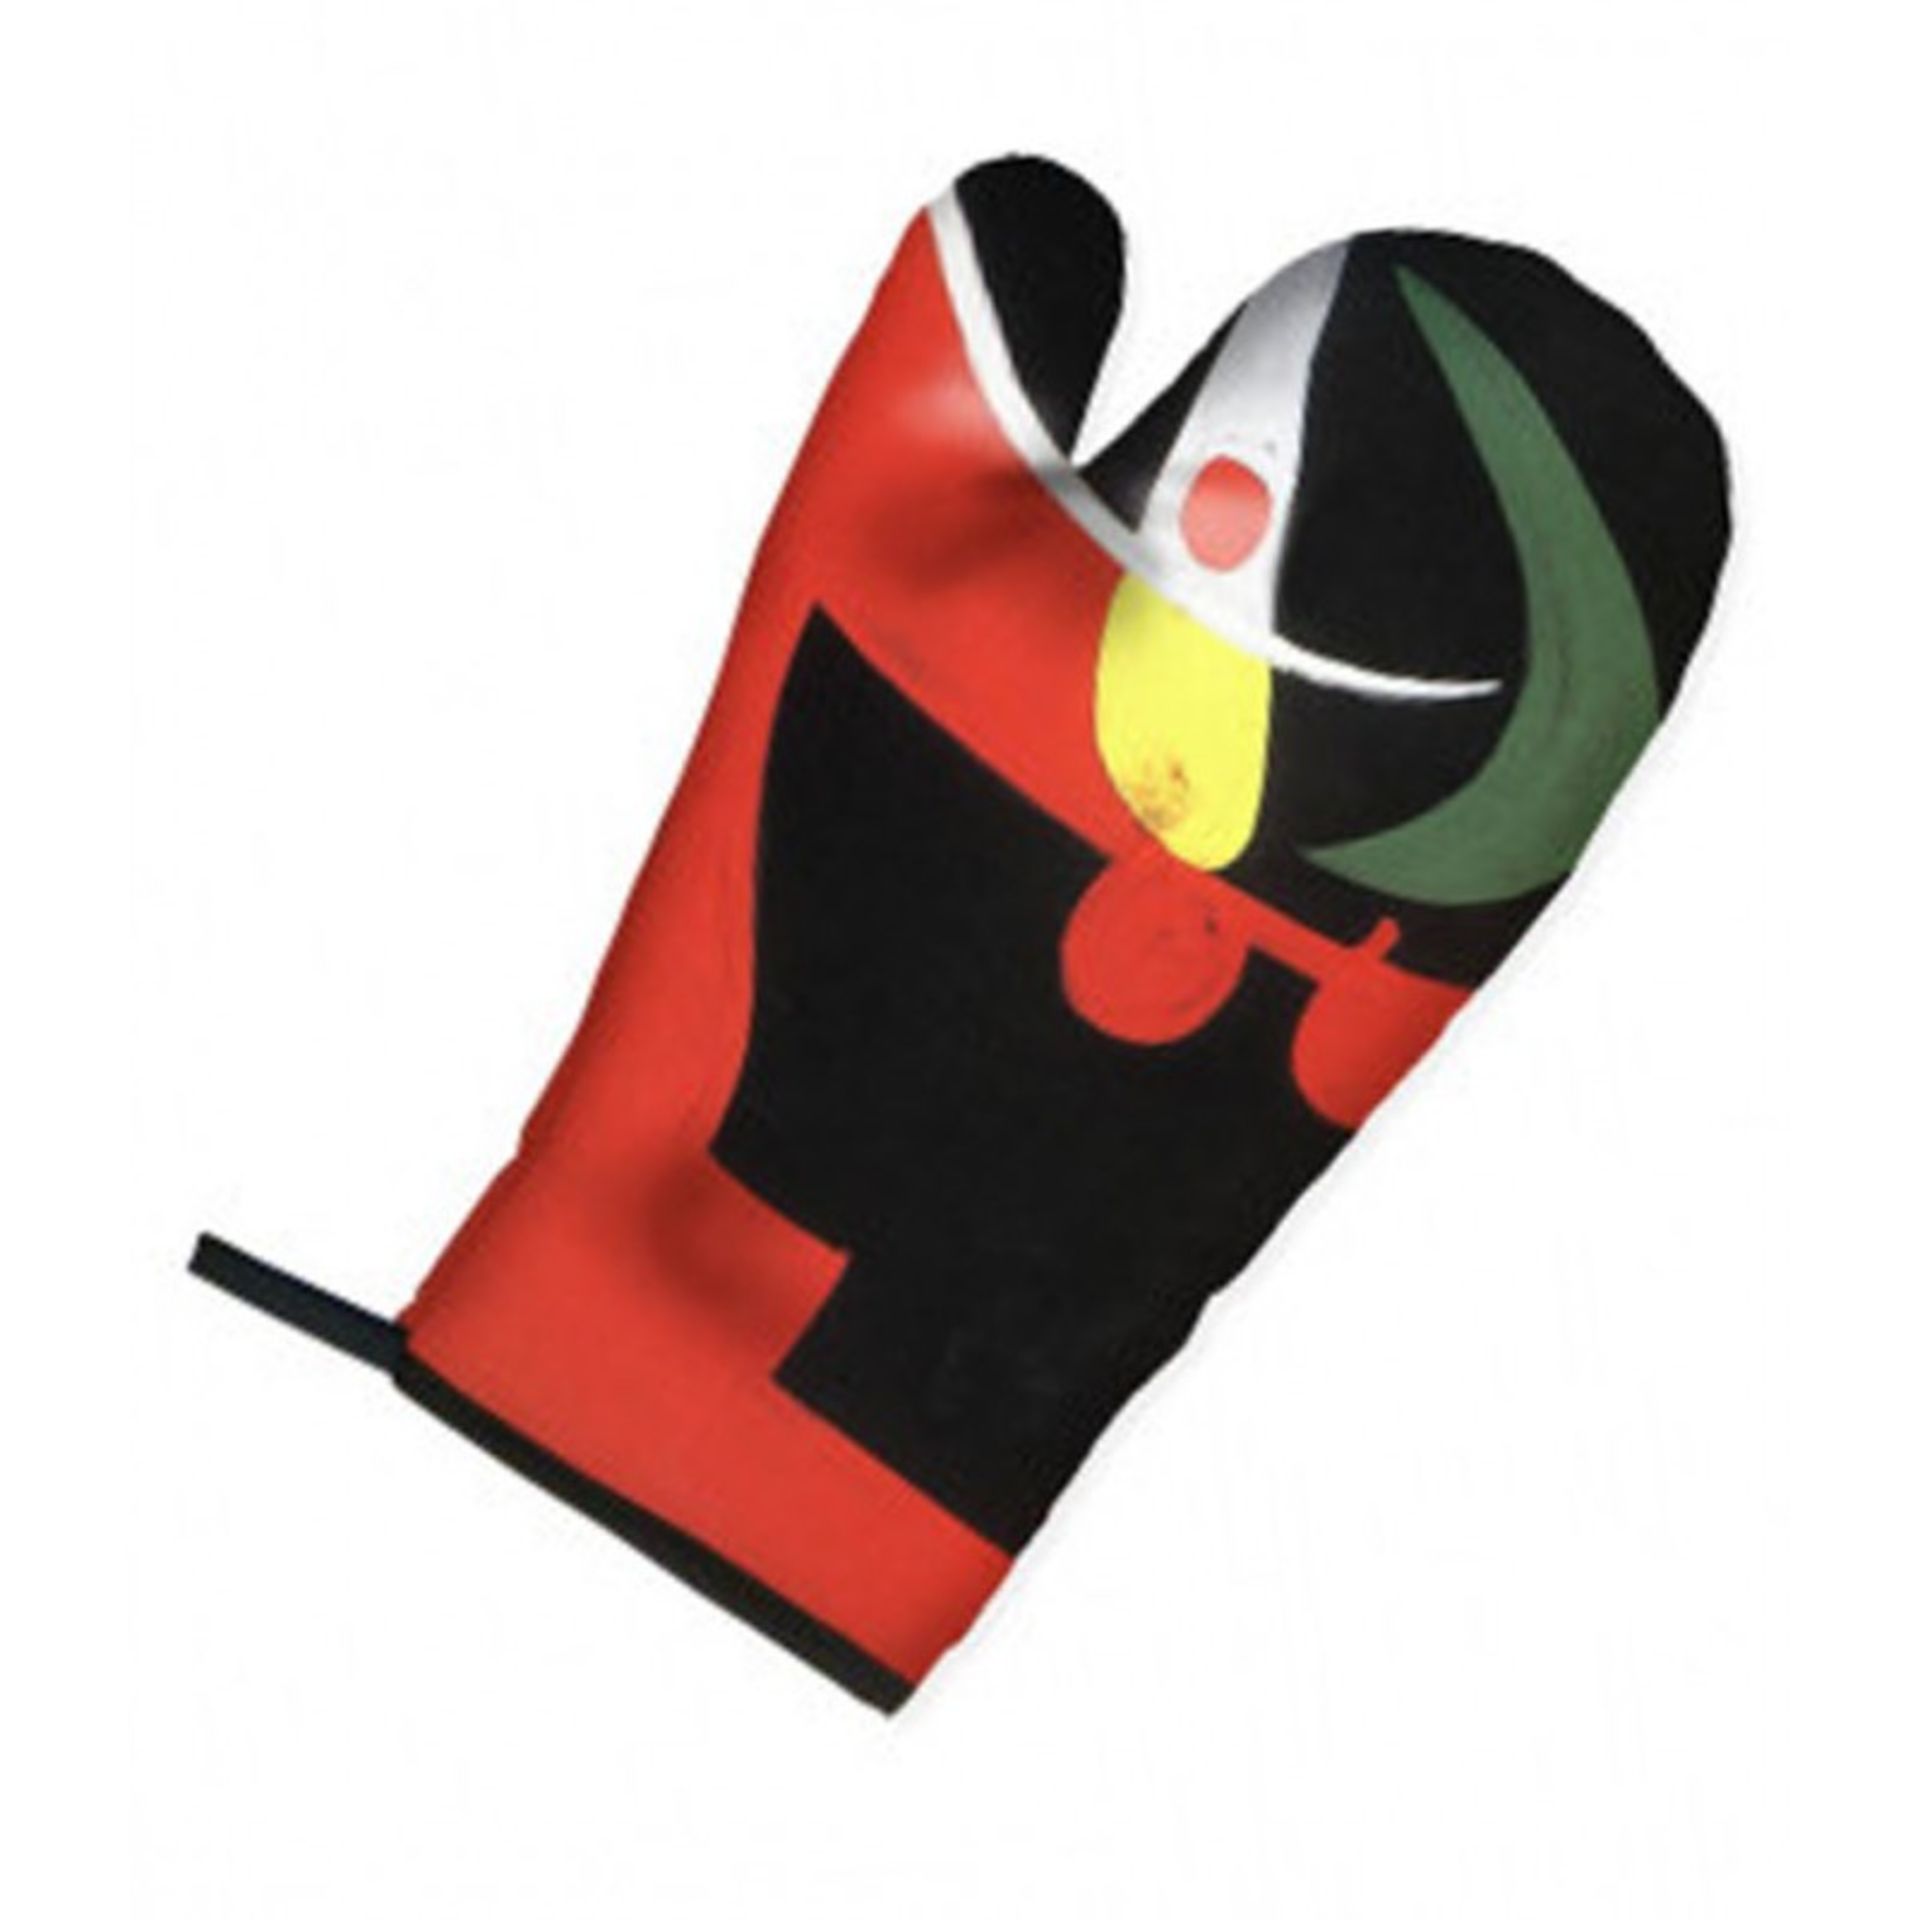 Joan Miro Apron and Oven Mit - Image 2 of 2